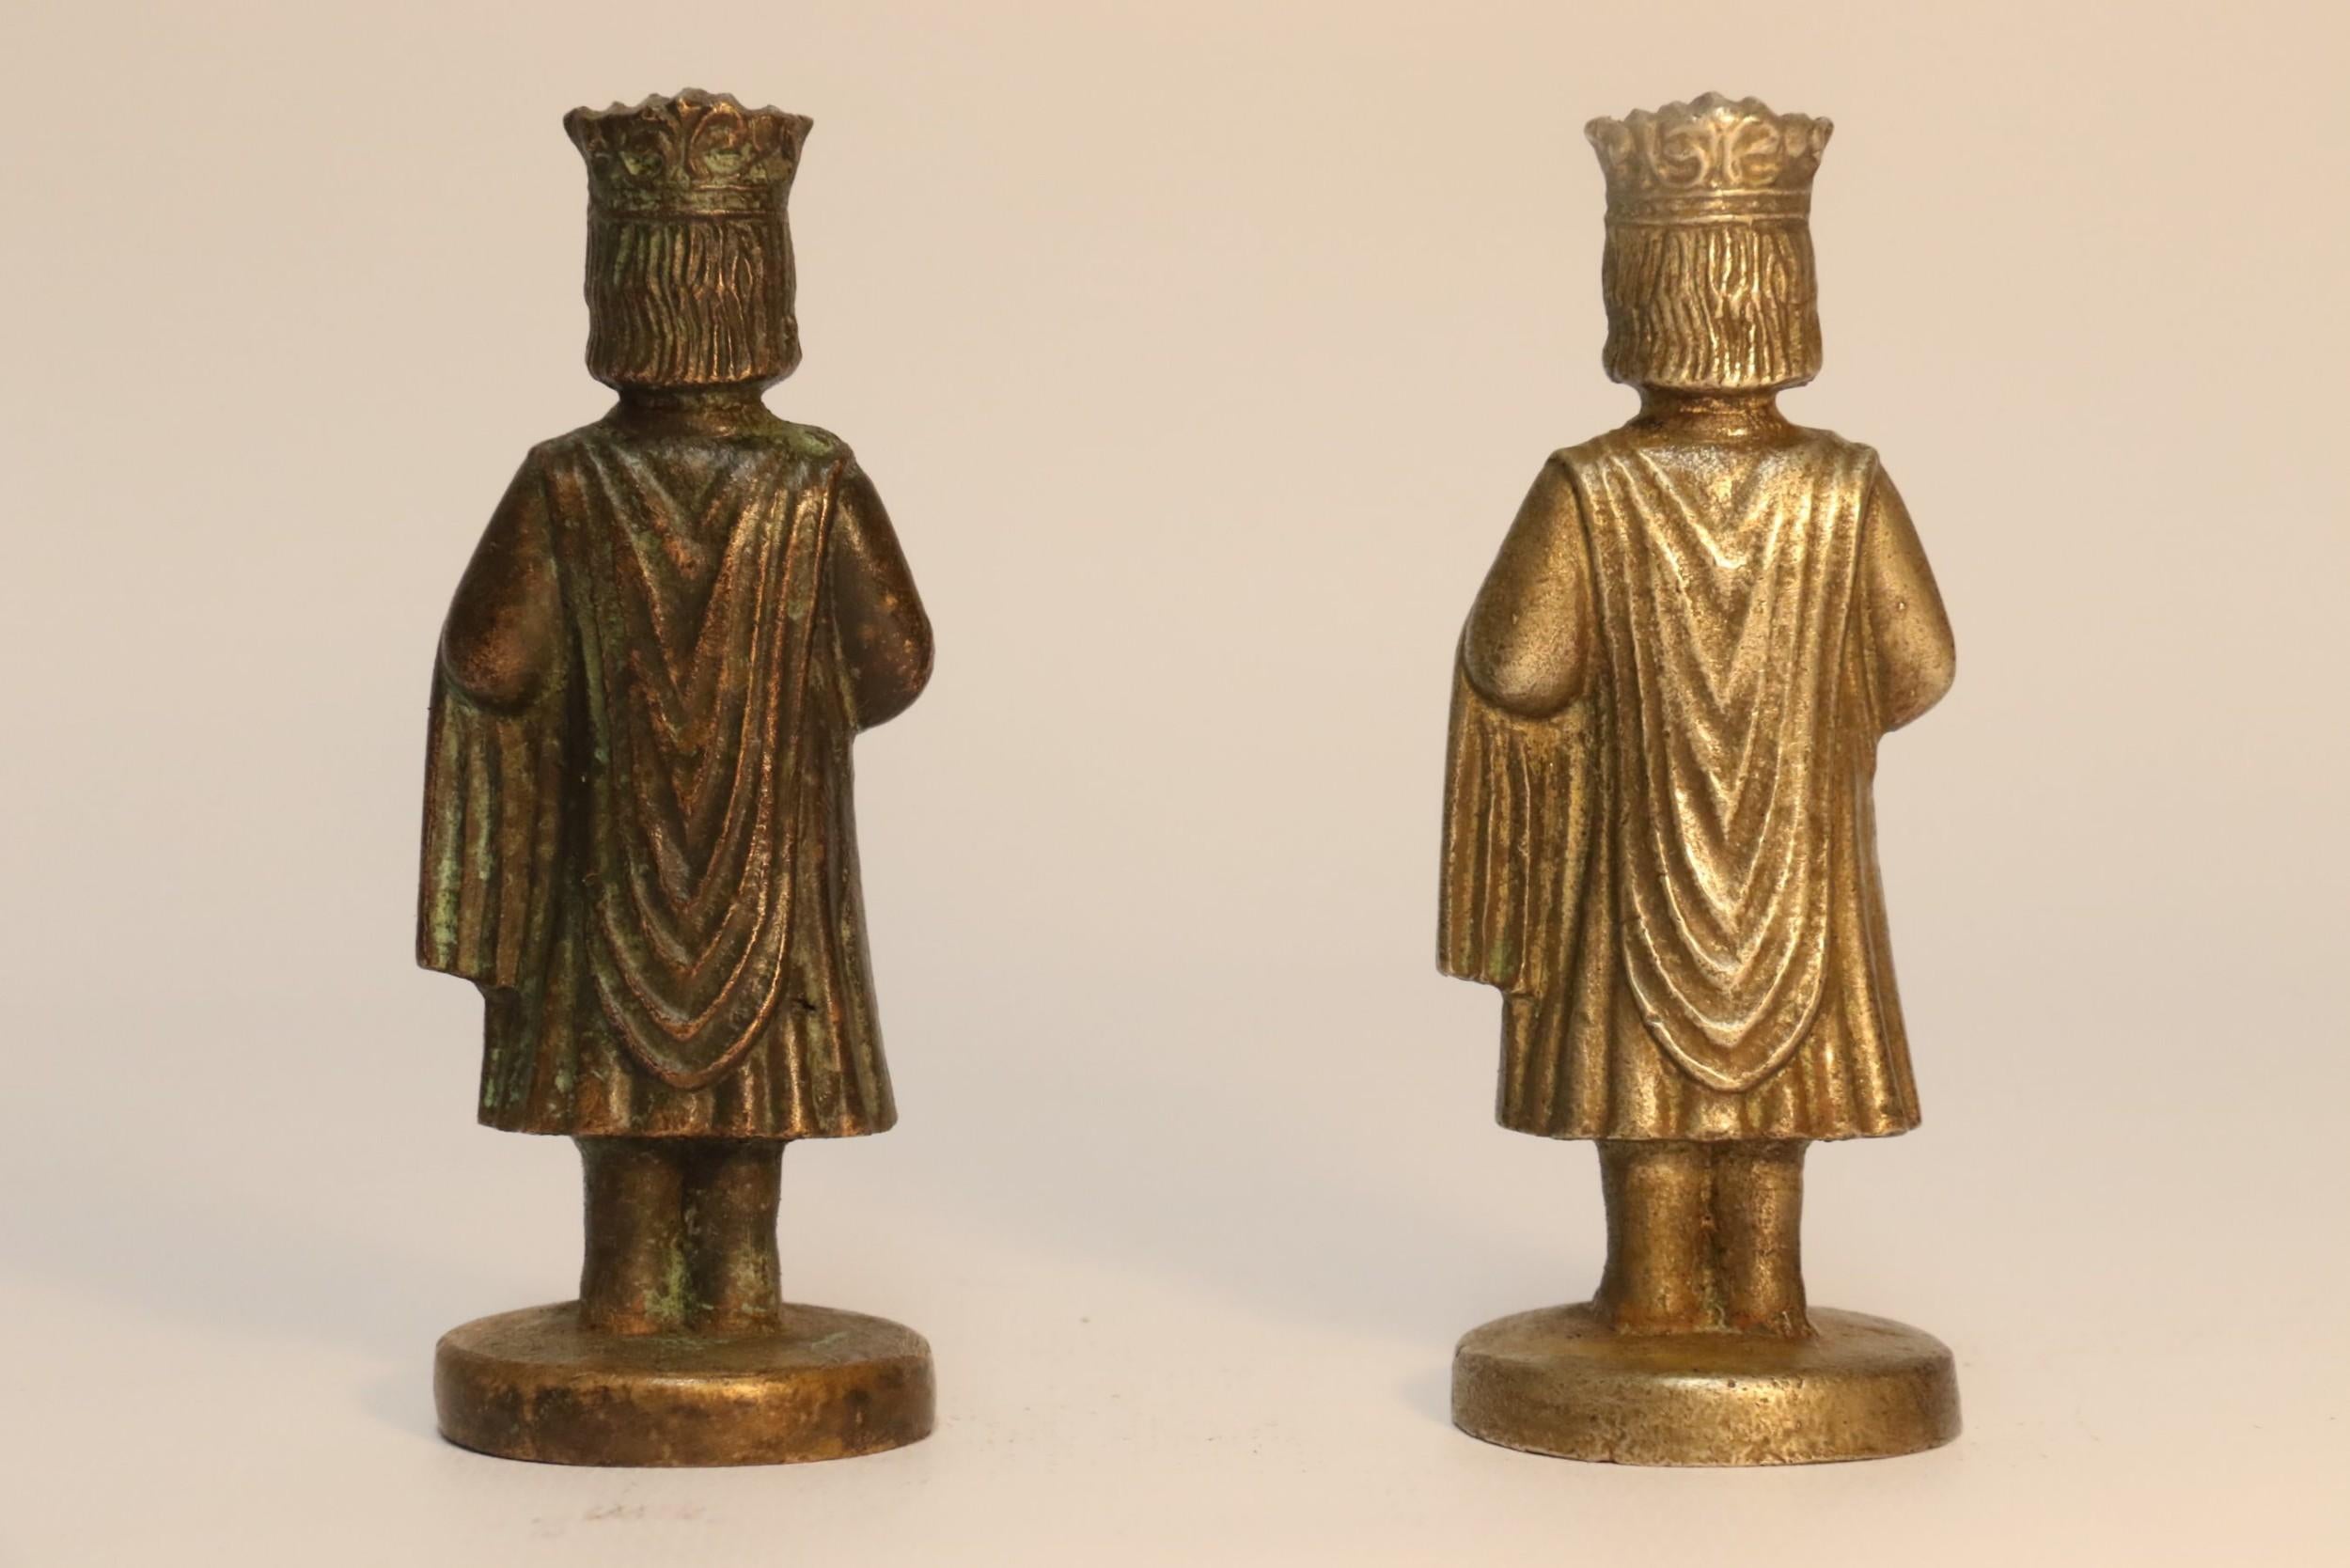 Novelty Heavy Cast Nickel and Bronze Chess Set Modeled on Medieval Figures For Sale 3